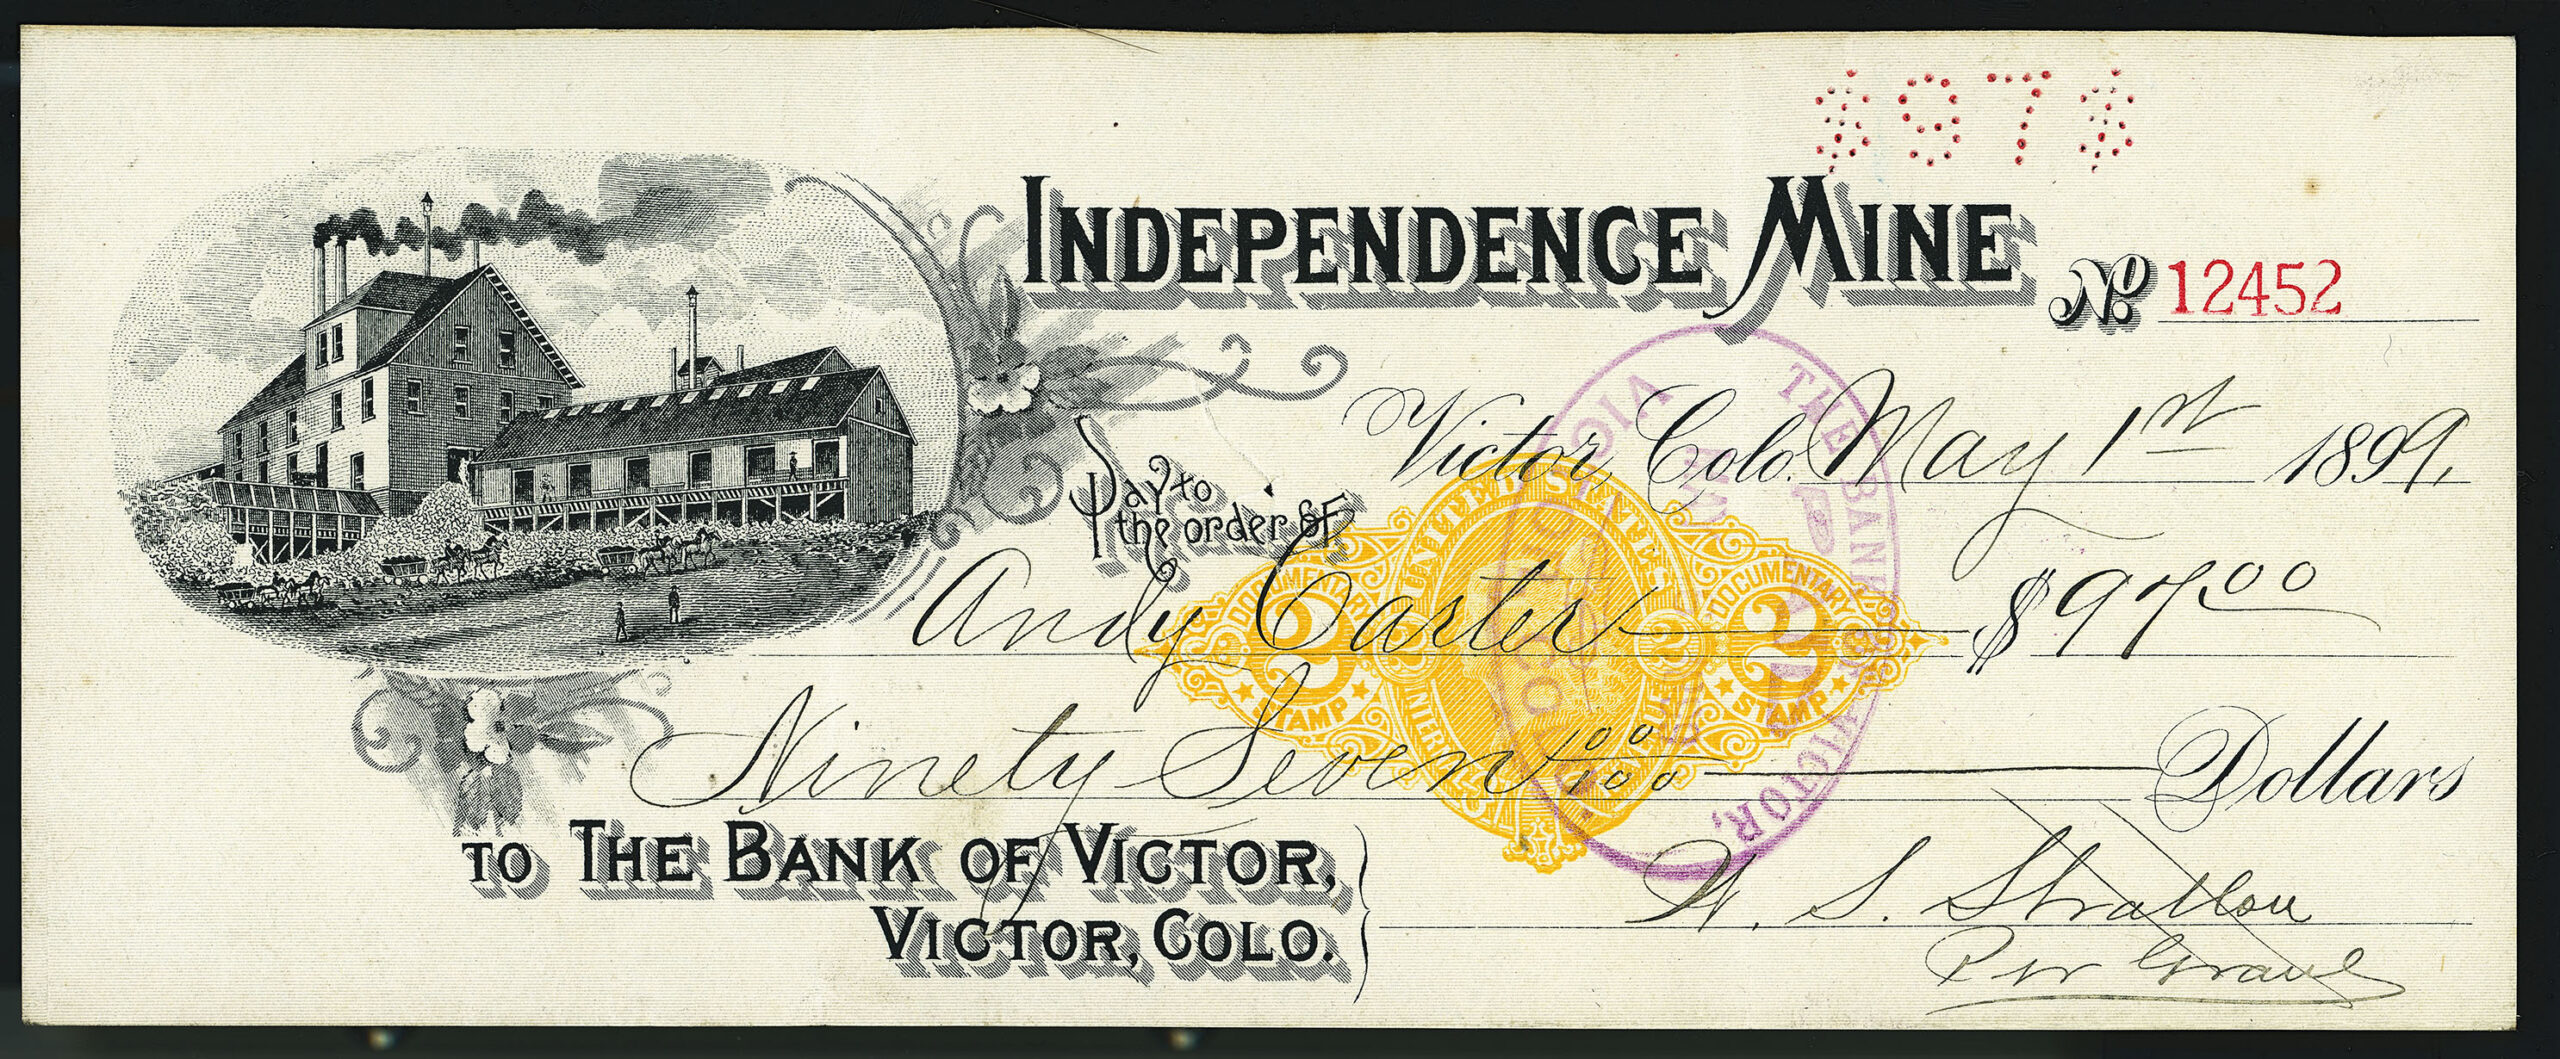 INDEPENDENCE MINE, Bank of Victor, Victor, Colorado, Revenue-imprinted RN-X7 check, W. S. Stratton owned gold mine, 1899